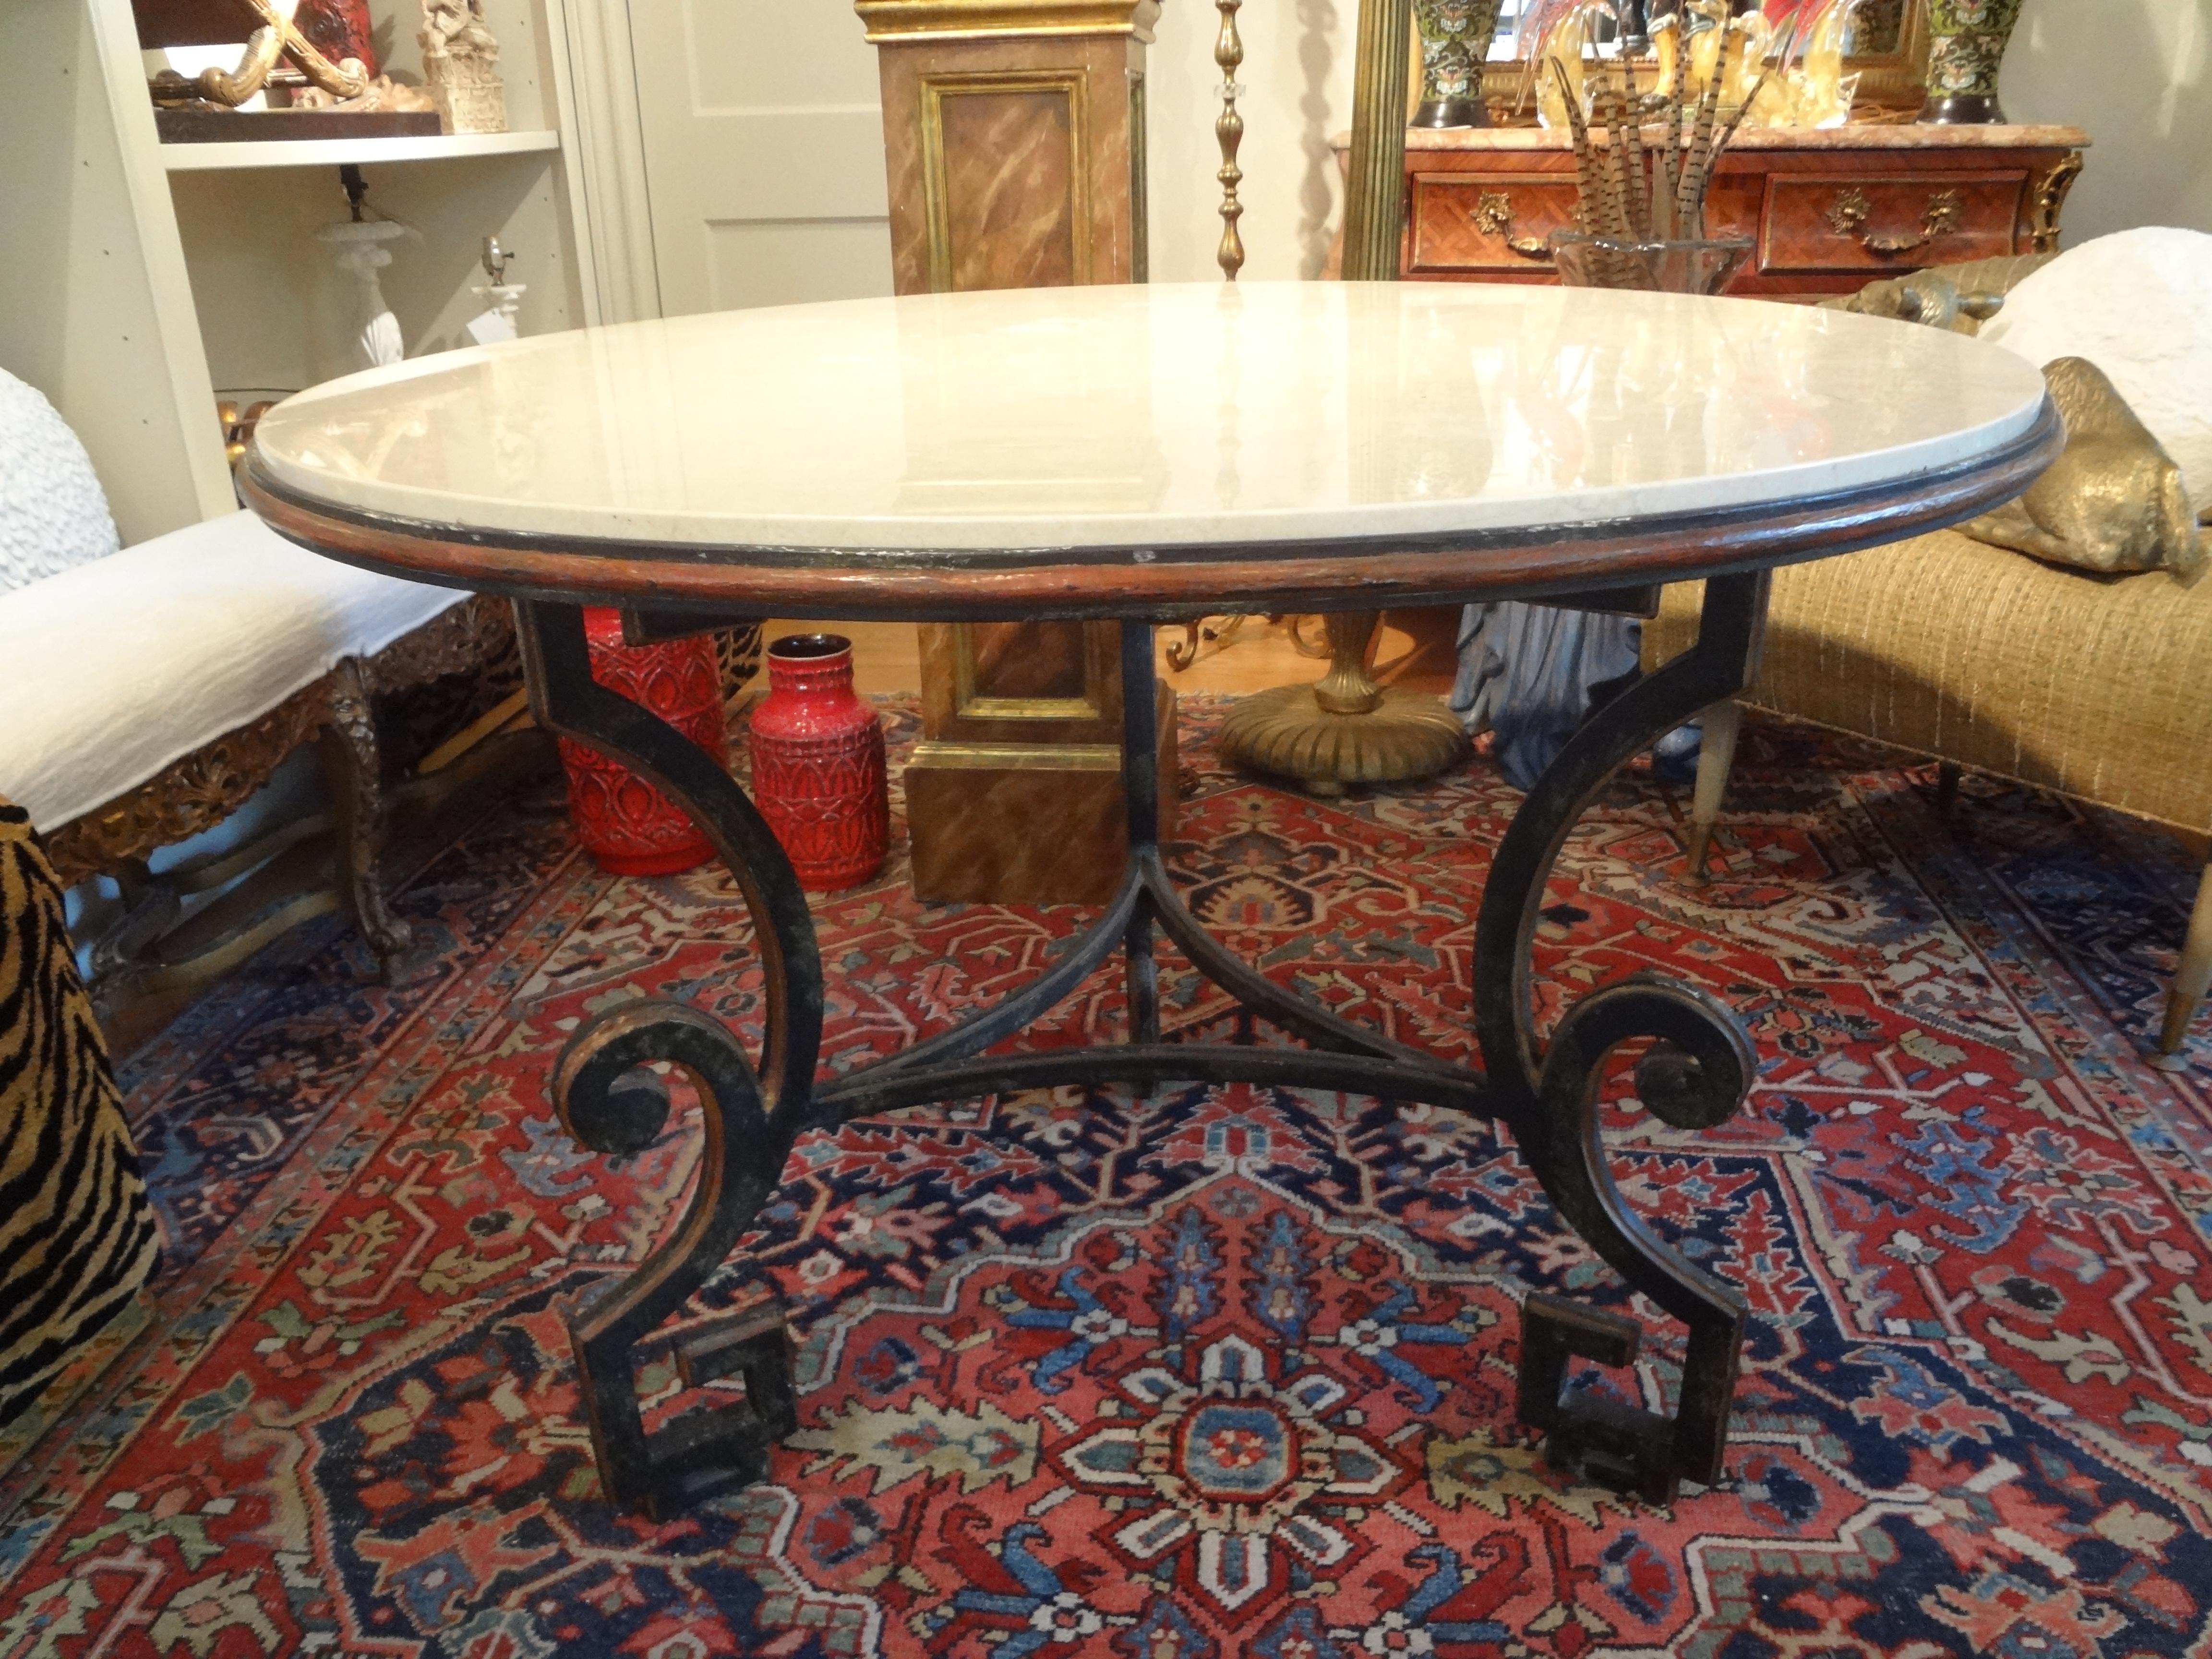 Italian Wrought Iron Center Table, Neoclassical Style
Stunning vintage Italian Neoclassical style Greek key wrought iron center table with a travertine top. Our gorgeous heavy gauge Italian iron table has Greek key legs with a travertine top